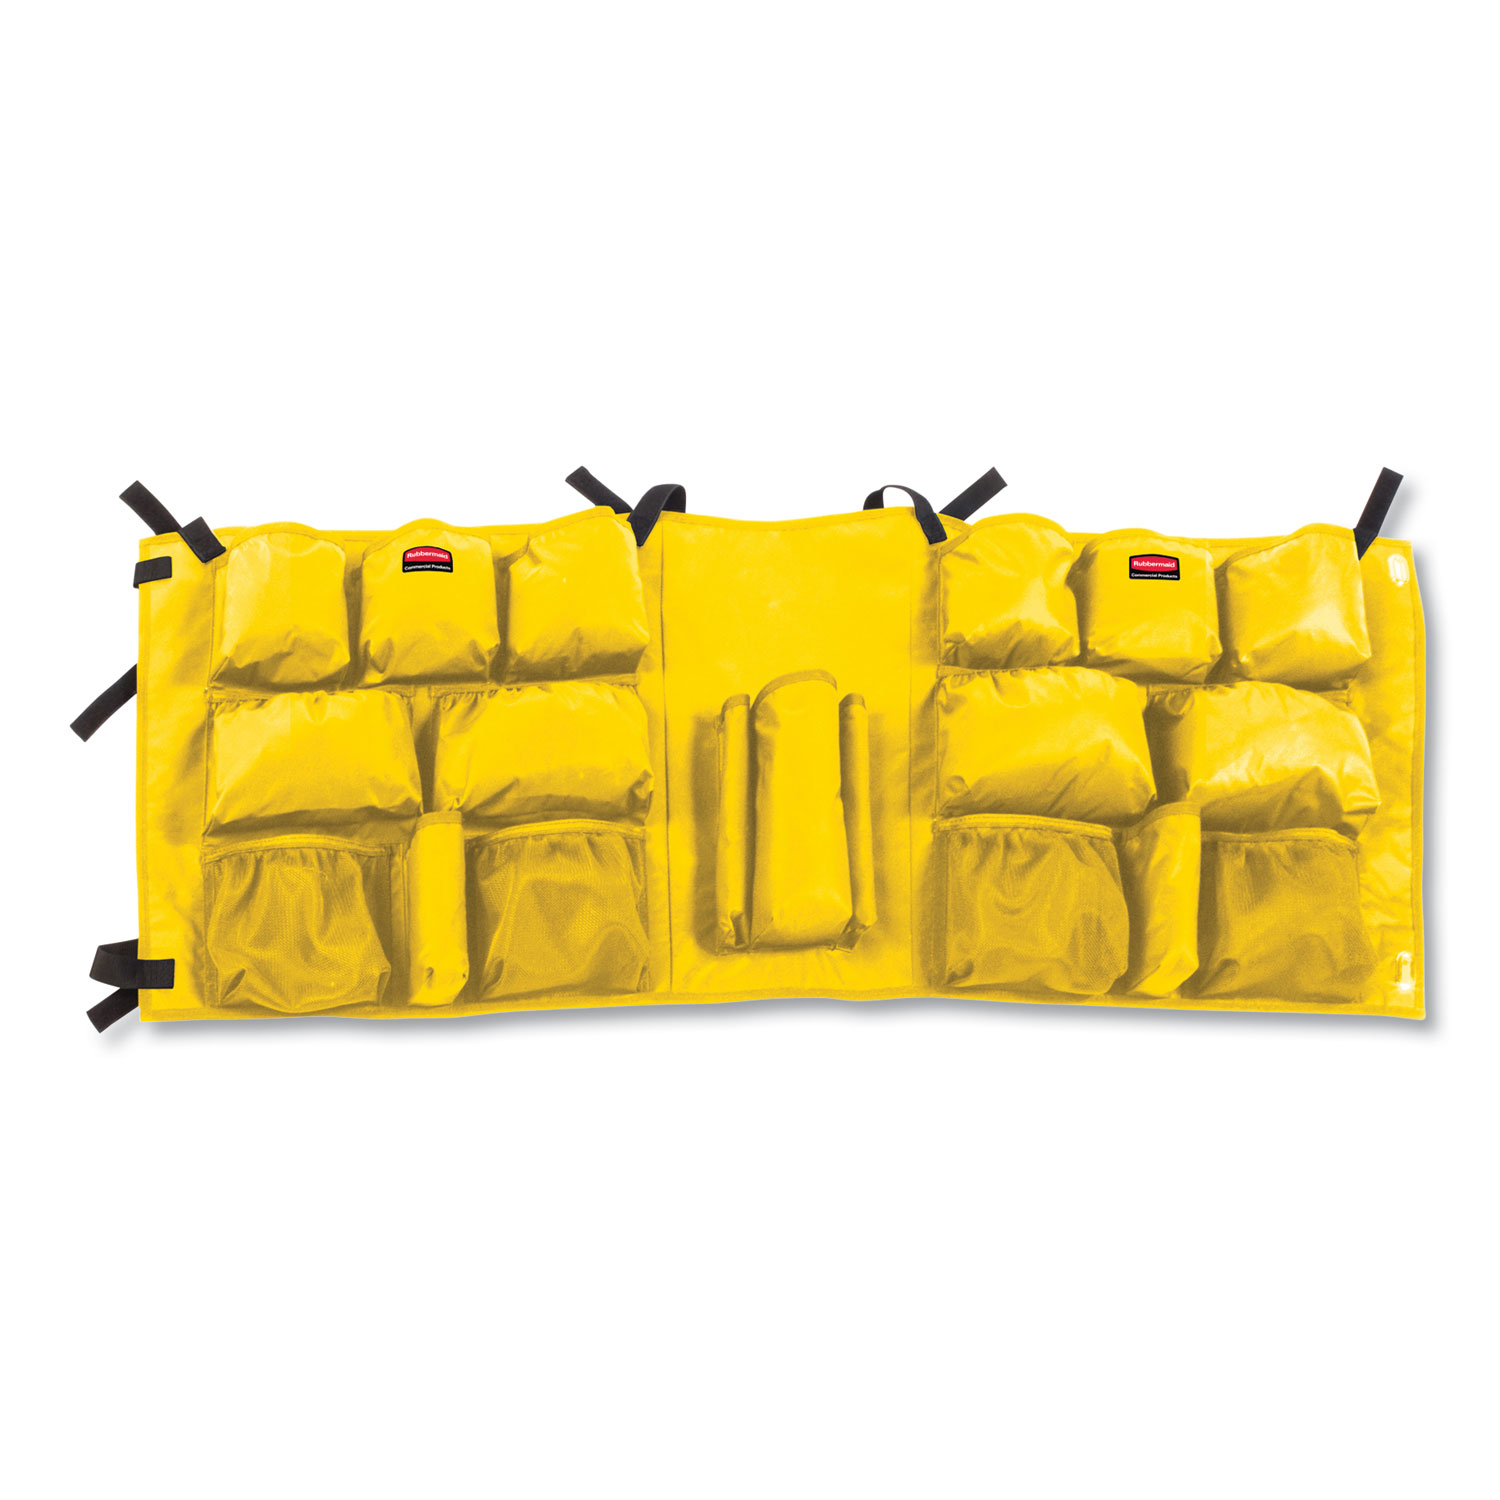  Rubbermaid Commercial 2032951 Slim Jim Caddy Bag, 19 Compartments, 10.25w x 19h, Yellow (RCP2032951) 